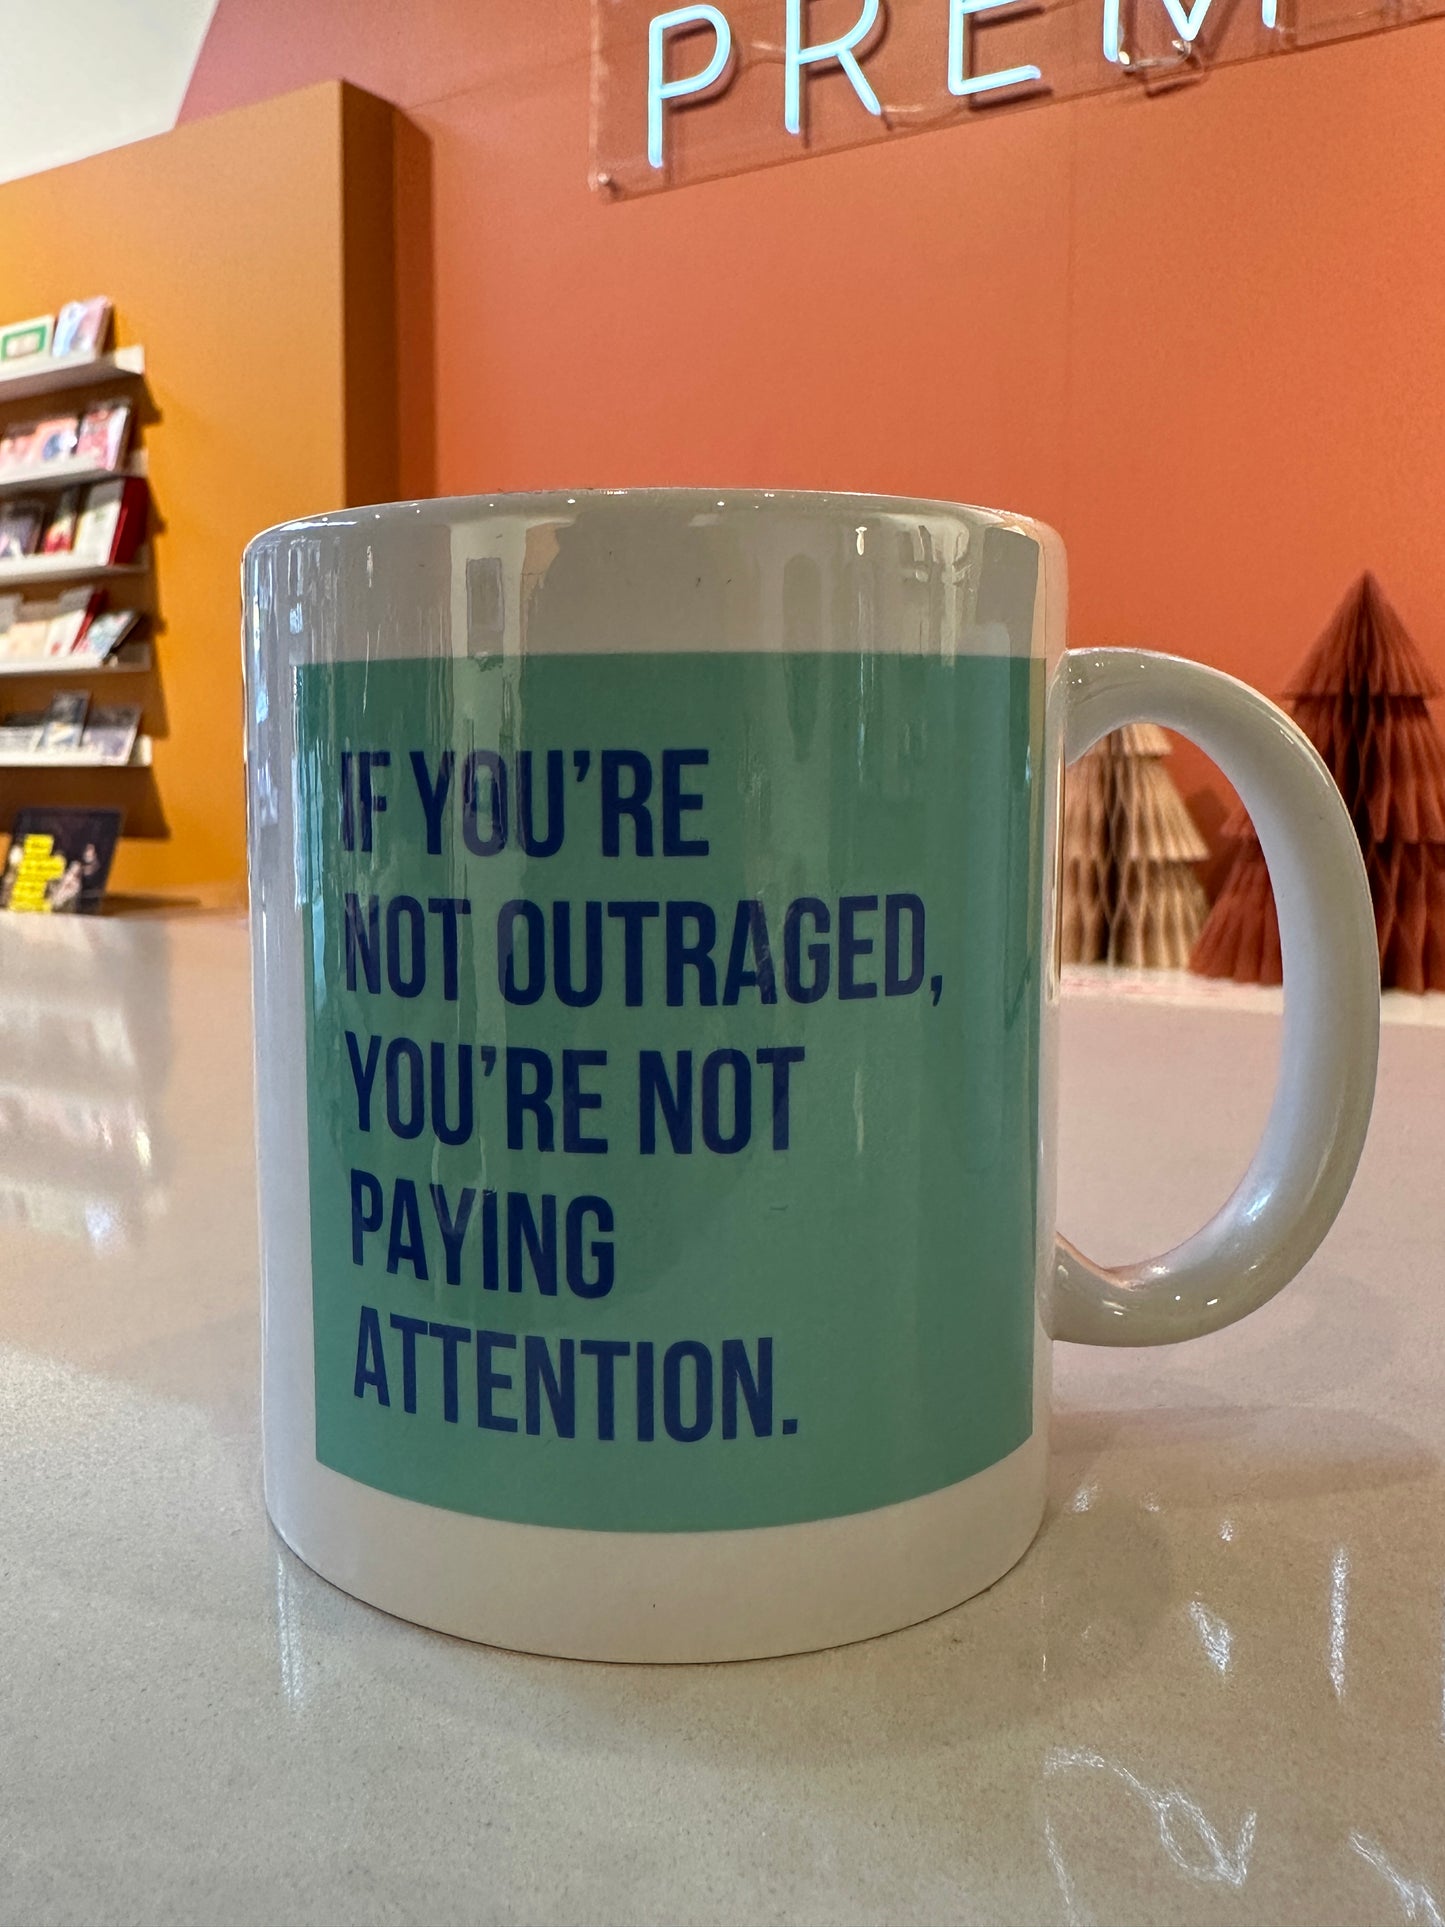 Madame Premier If You’re Not Outraged, You’re Not Paying Attention Mug